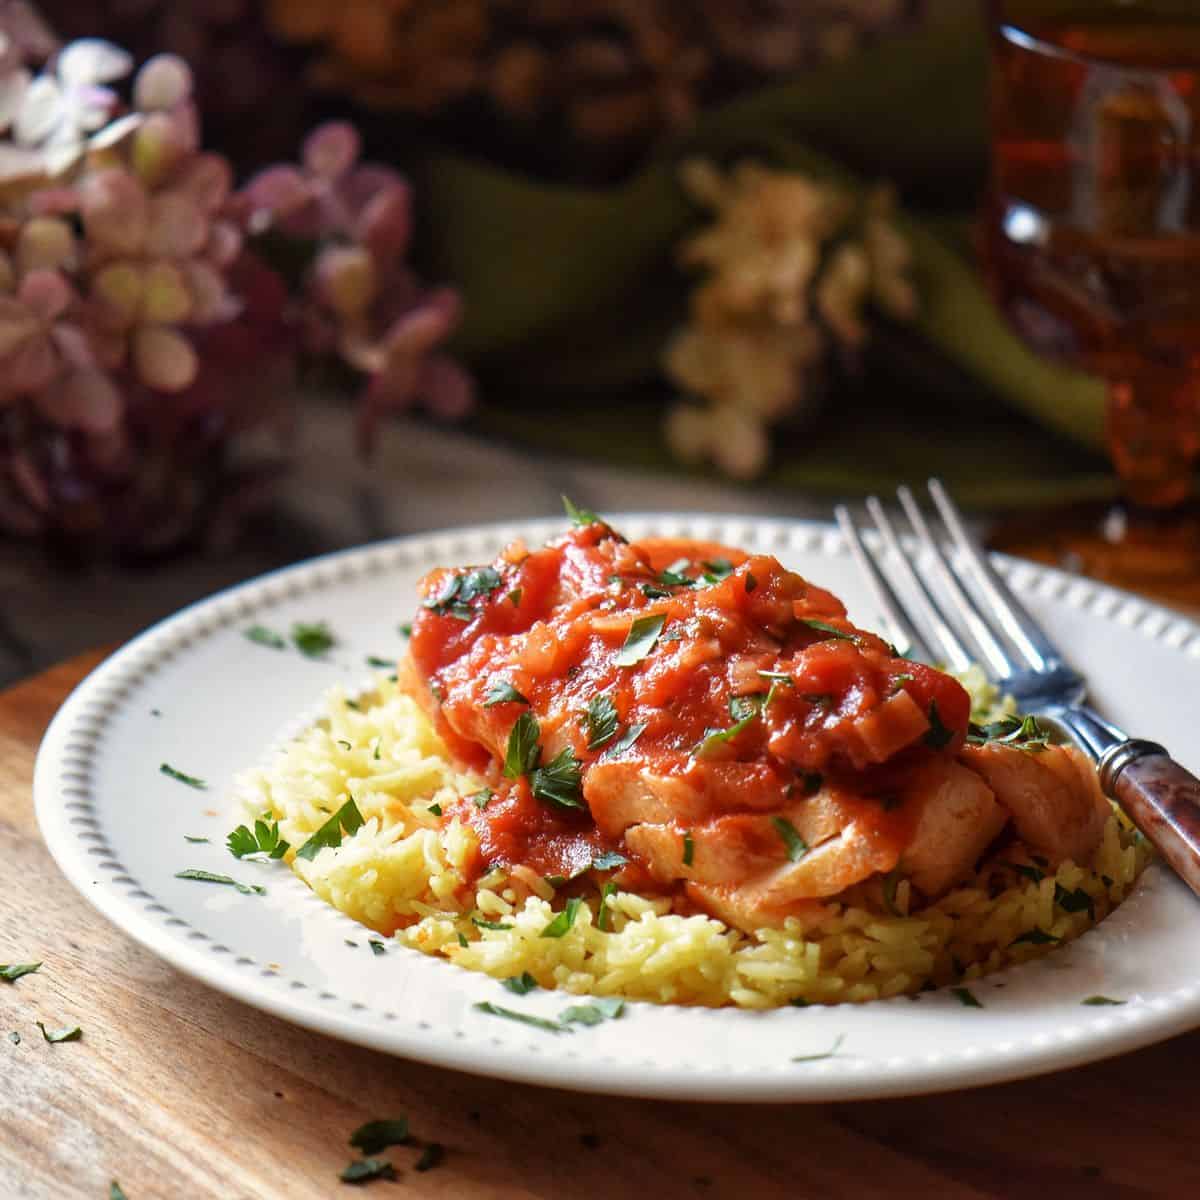 Italian cod with tomato sauce on a bed of rice.